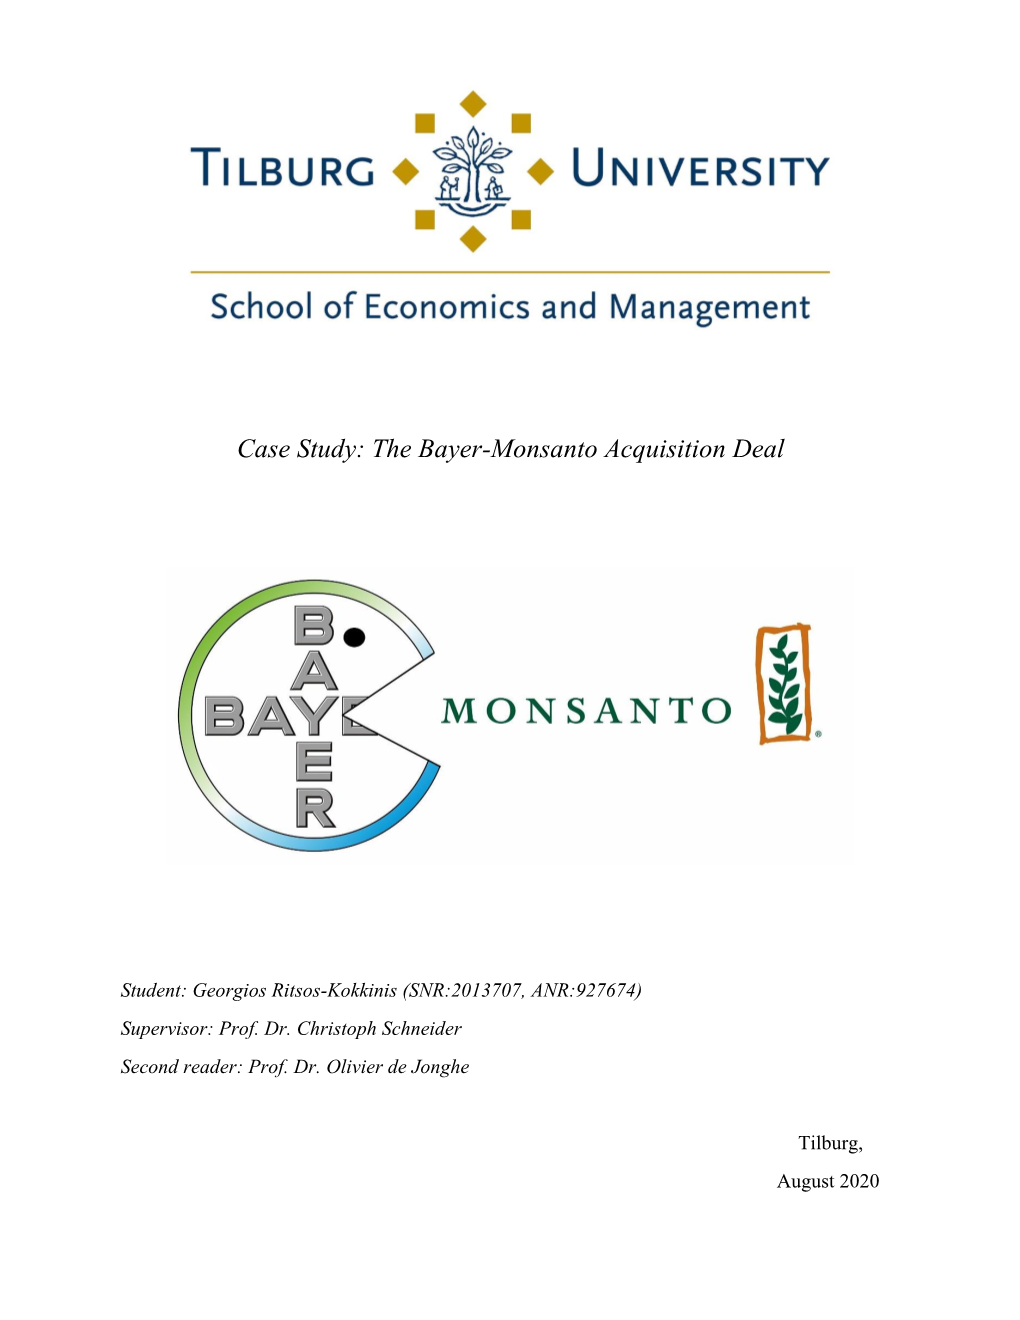 Case Study: the Bayer-Monsanto Acquisition Deal